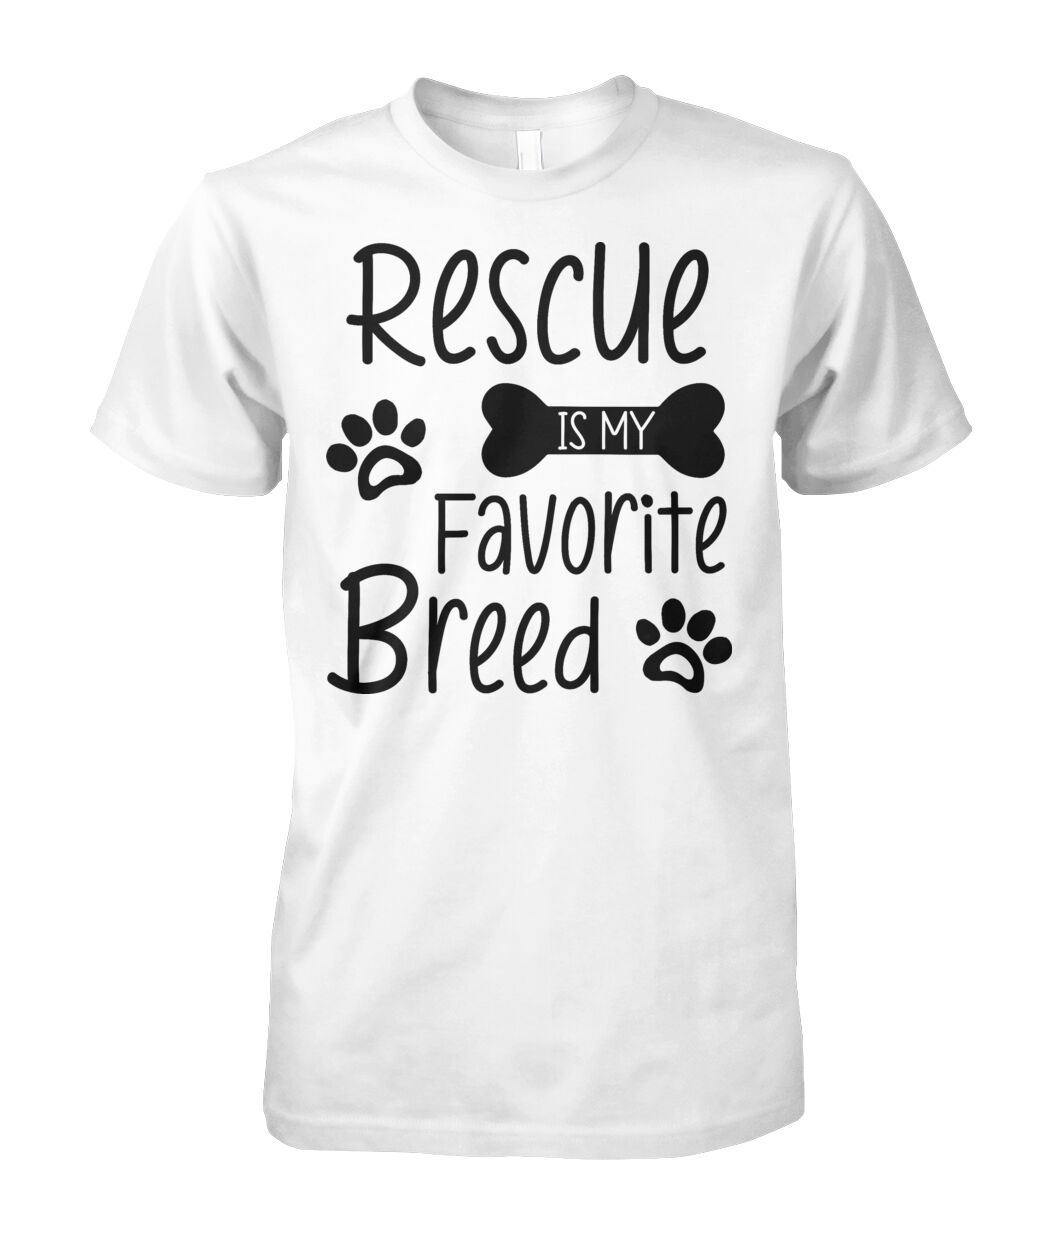 Rescue Is My Favorite Breed Shirt (Black Text)